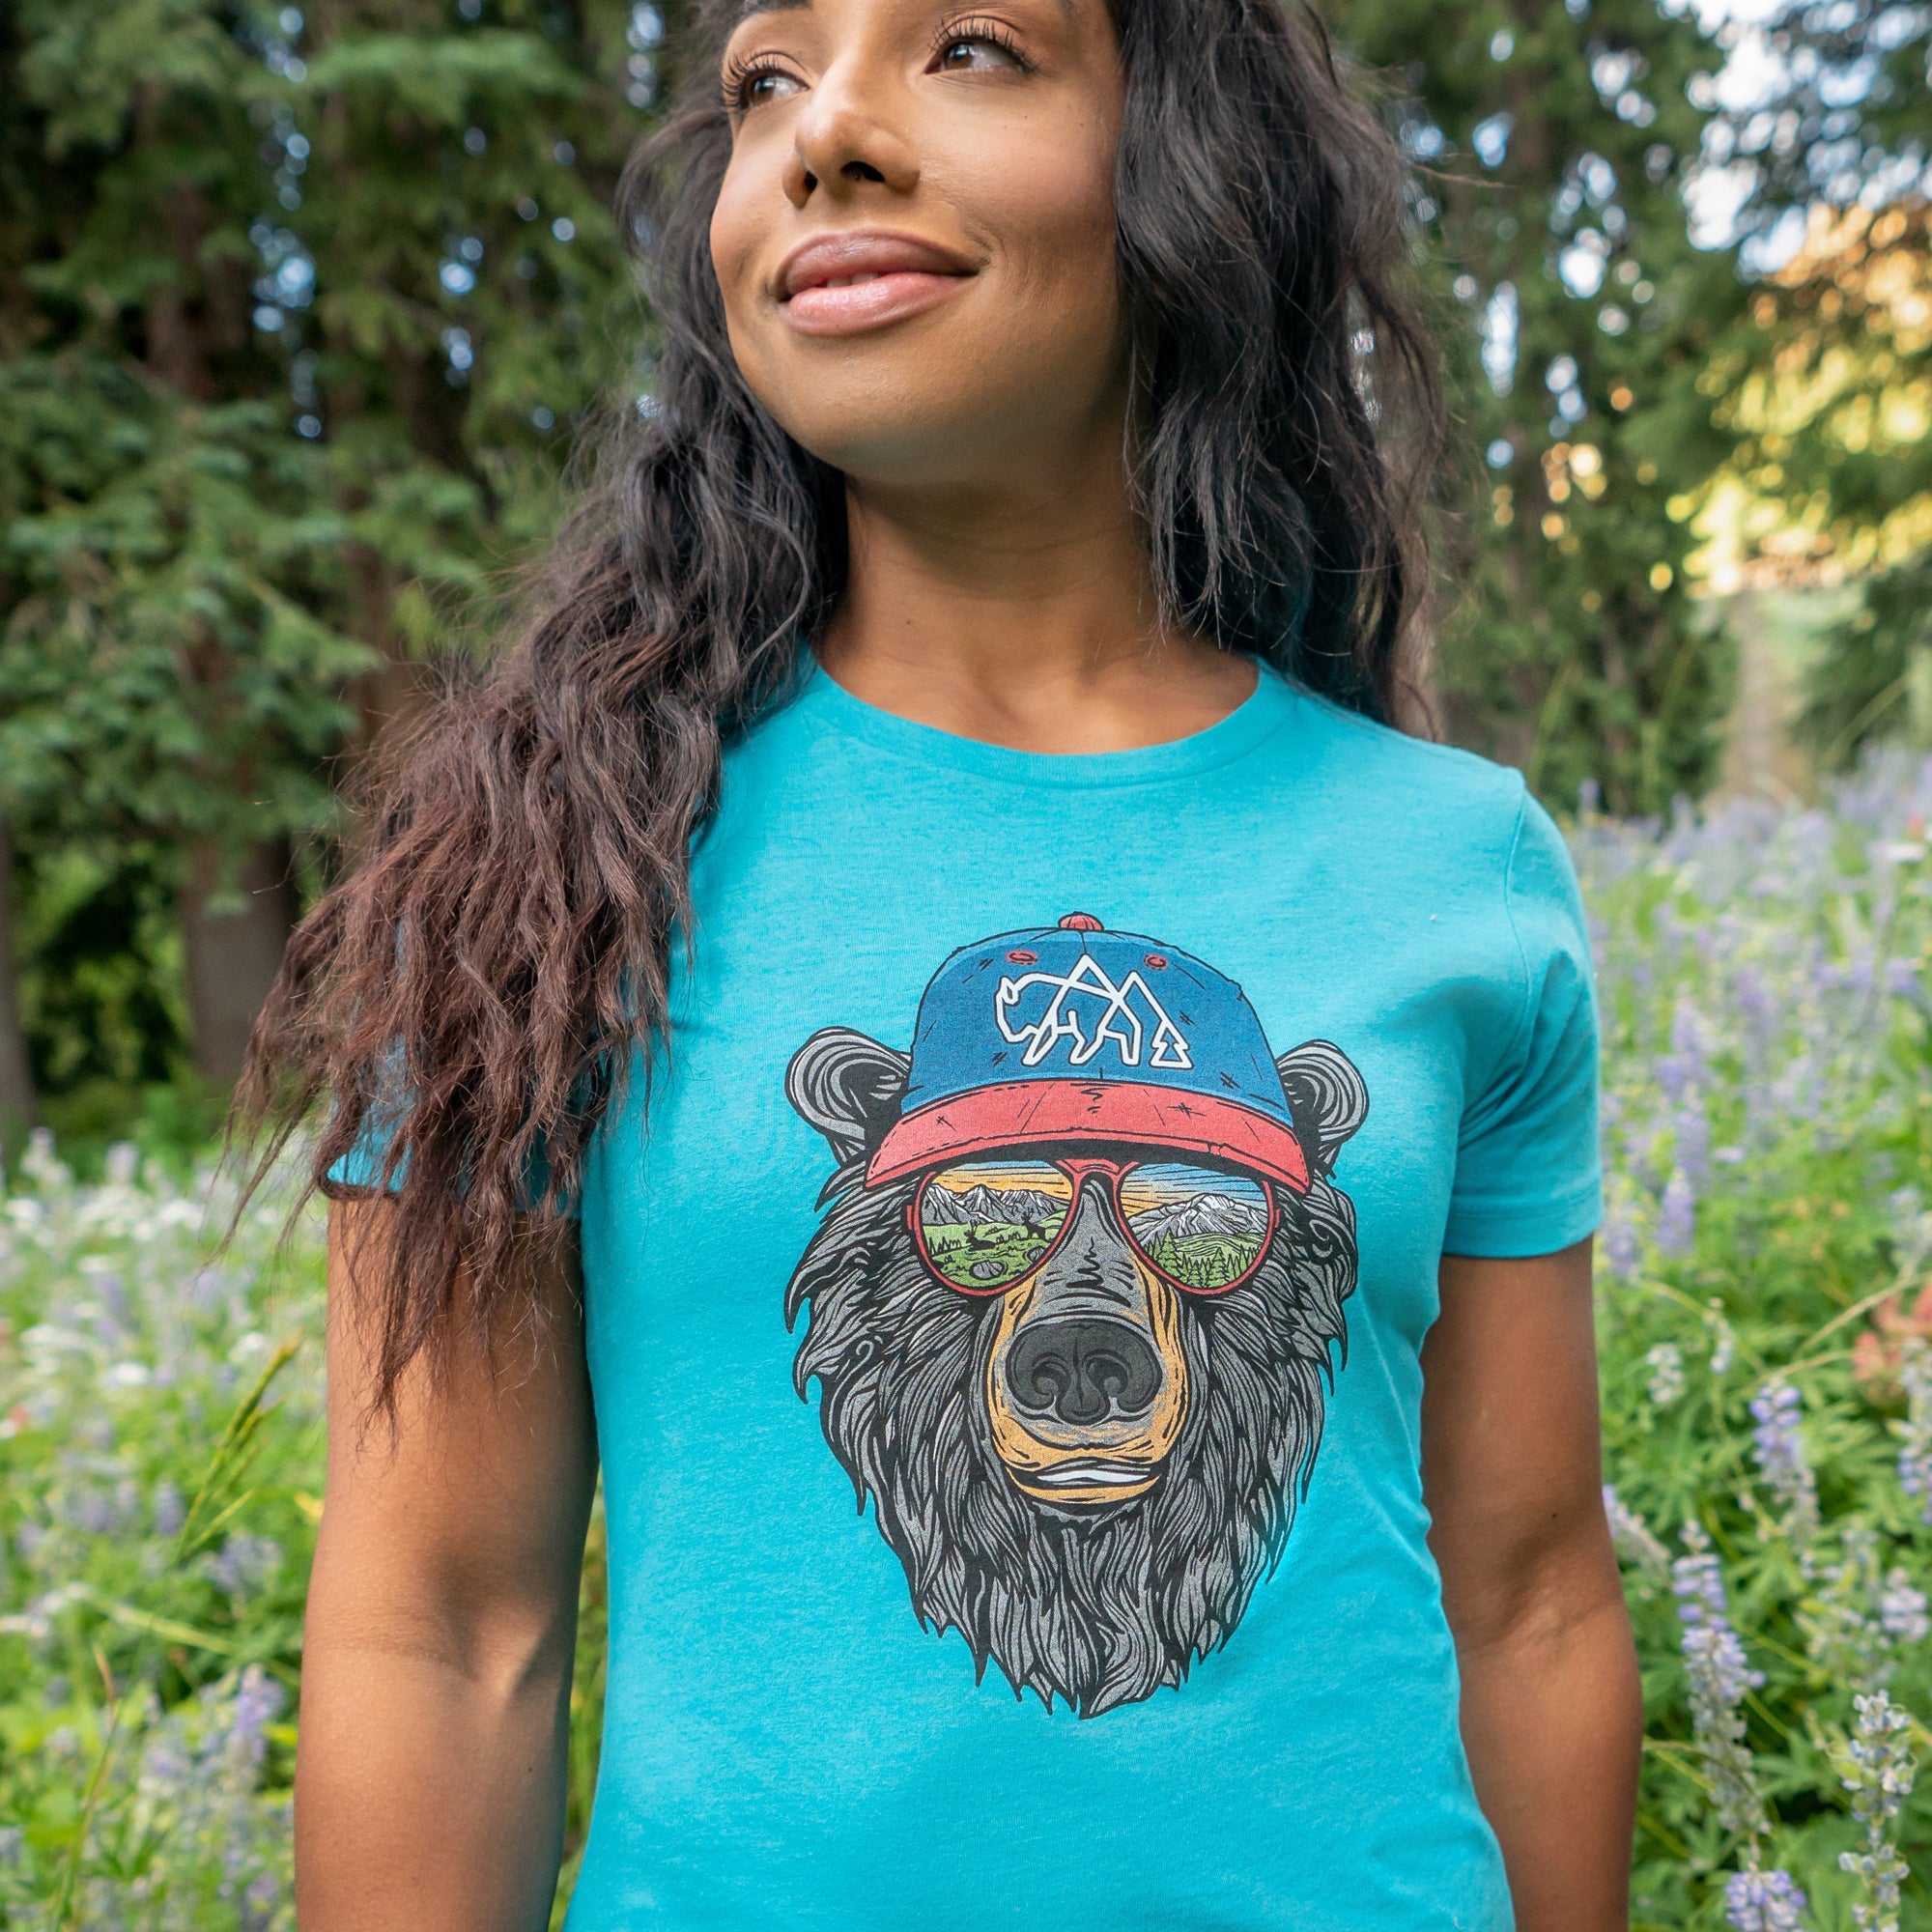 Miami Vice Bear Women's Fitted T-Shirt